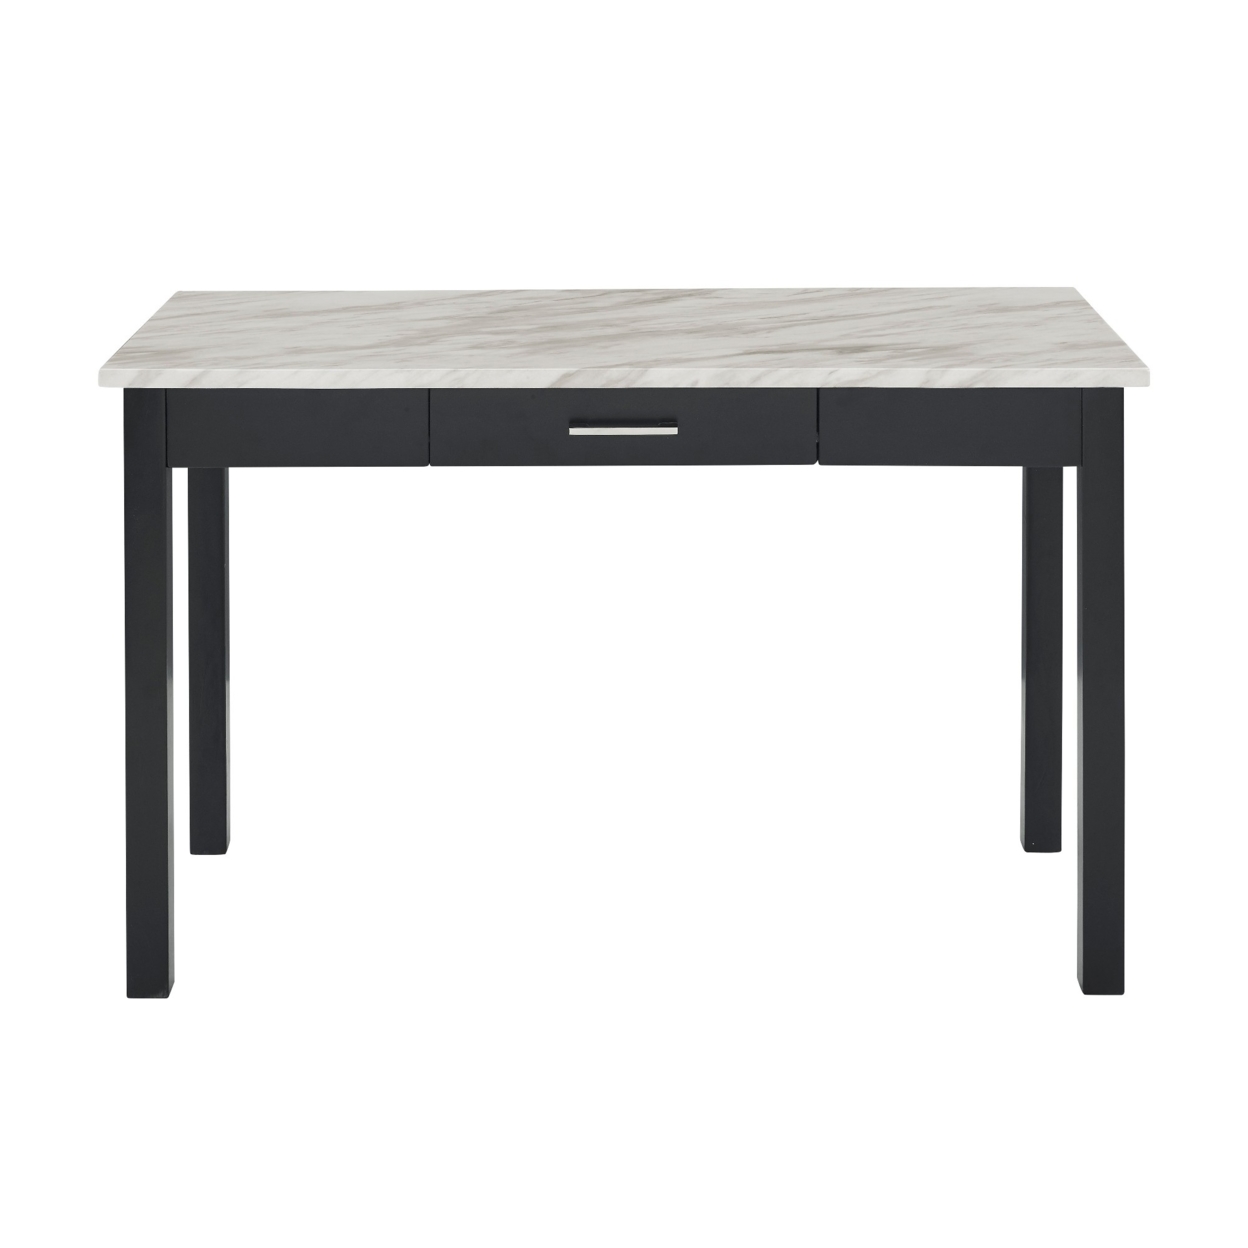 Jay 48 Inch Desk With Drawer And Faux Marble Top, Black- Saltoro Sherpi